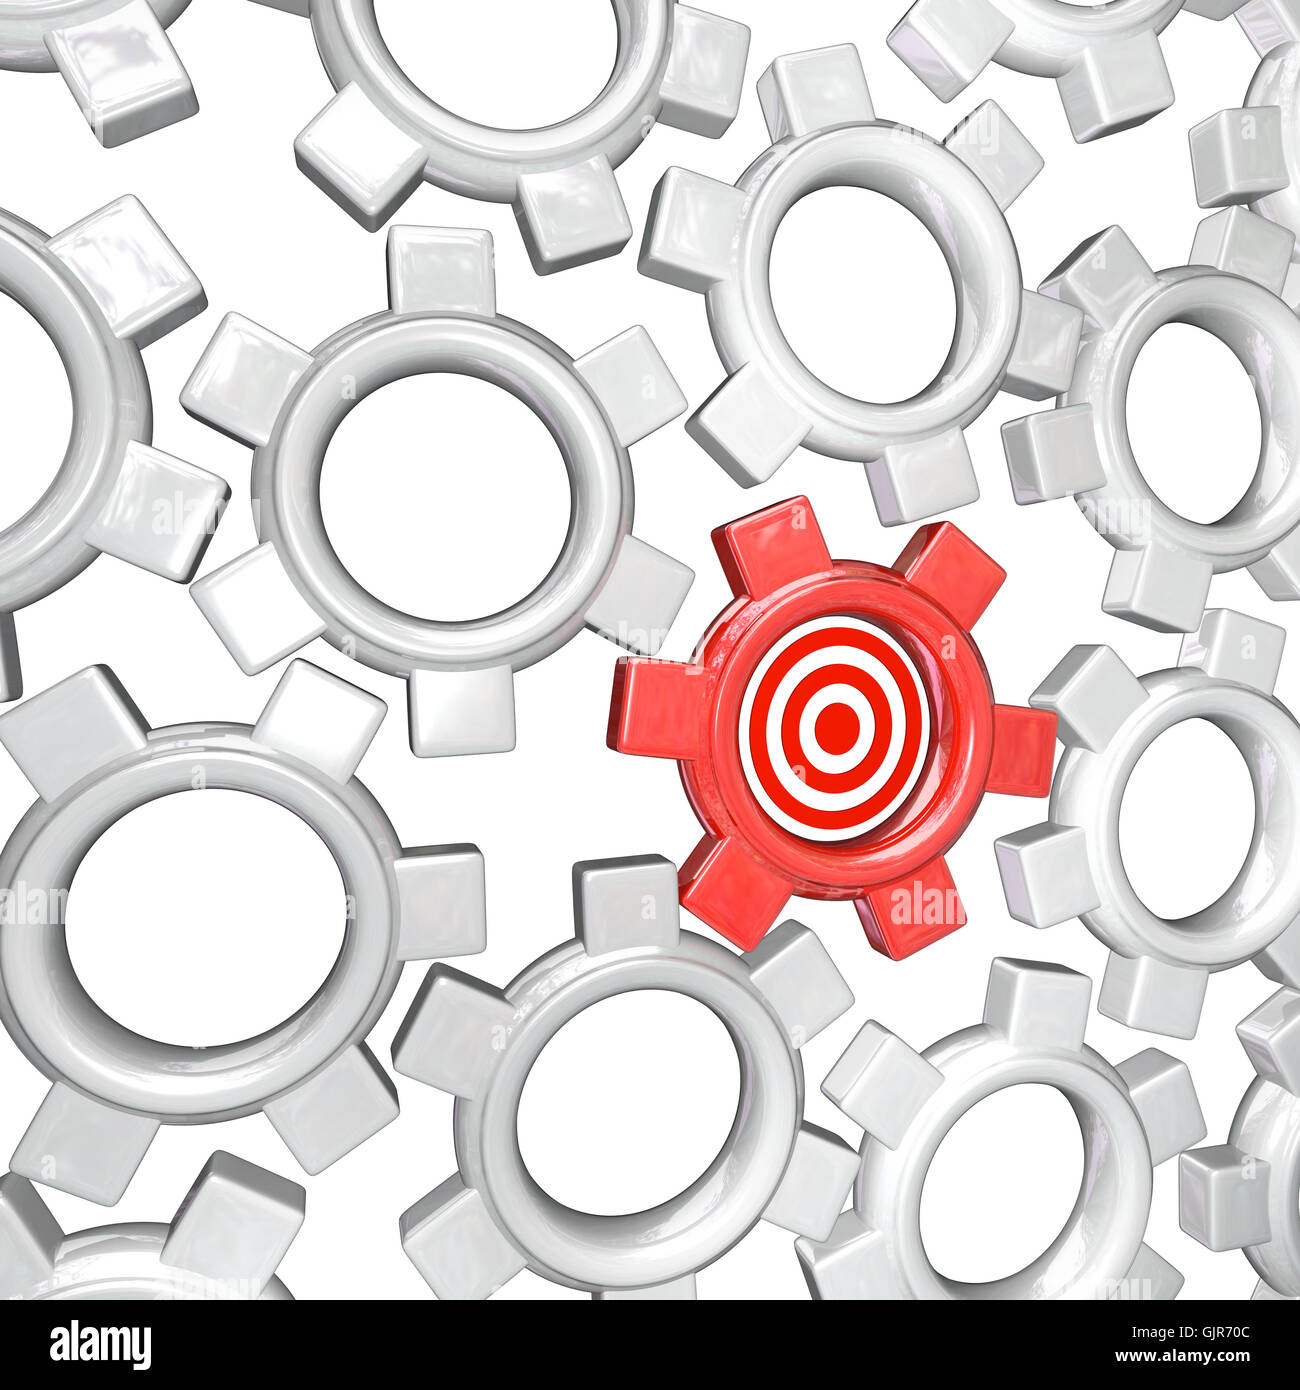 One Gear is Singled Out as Vital Part - Targeted Bulls-Eye Stock Photo